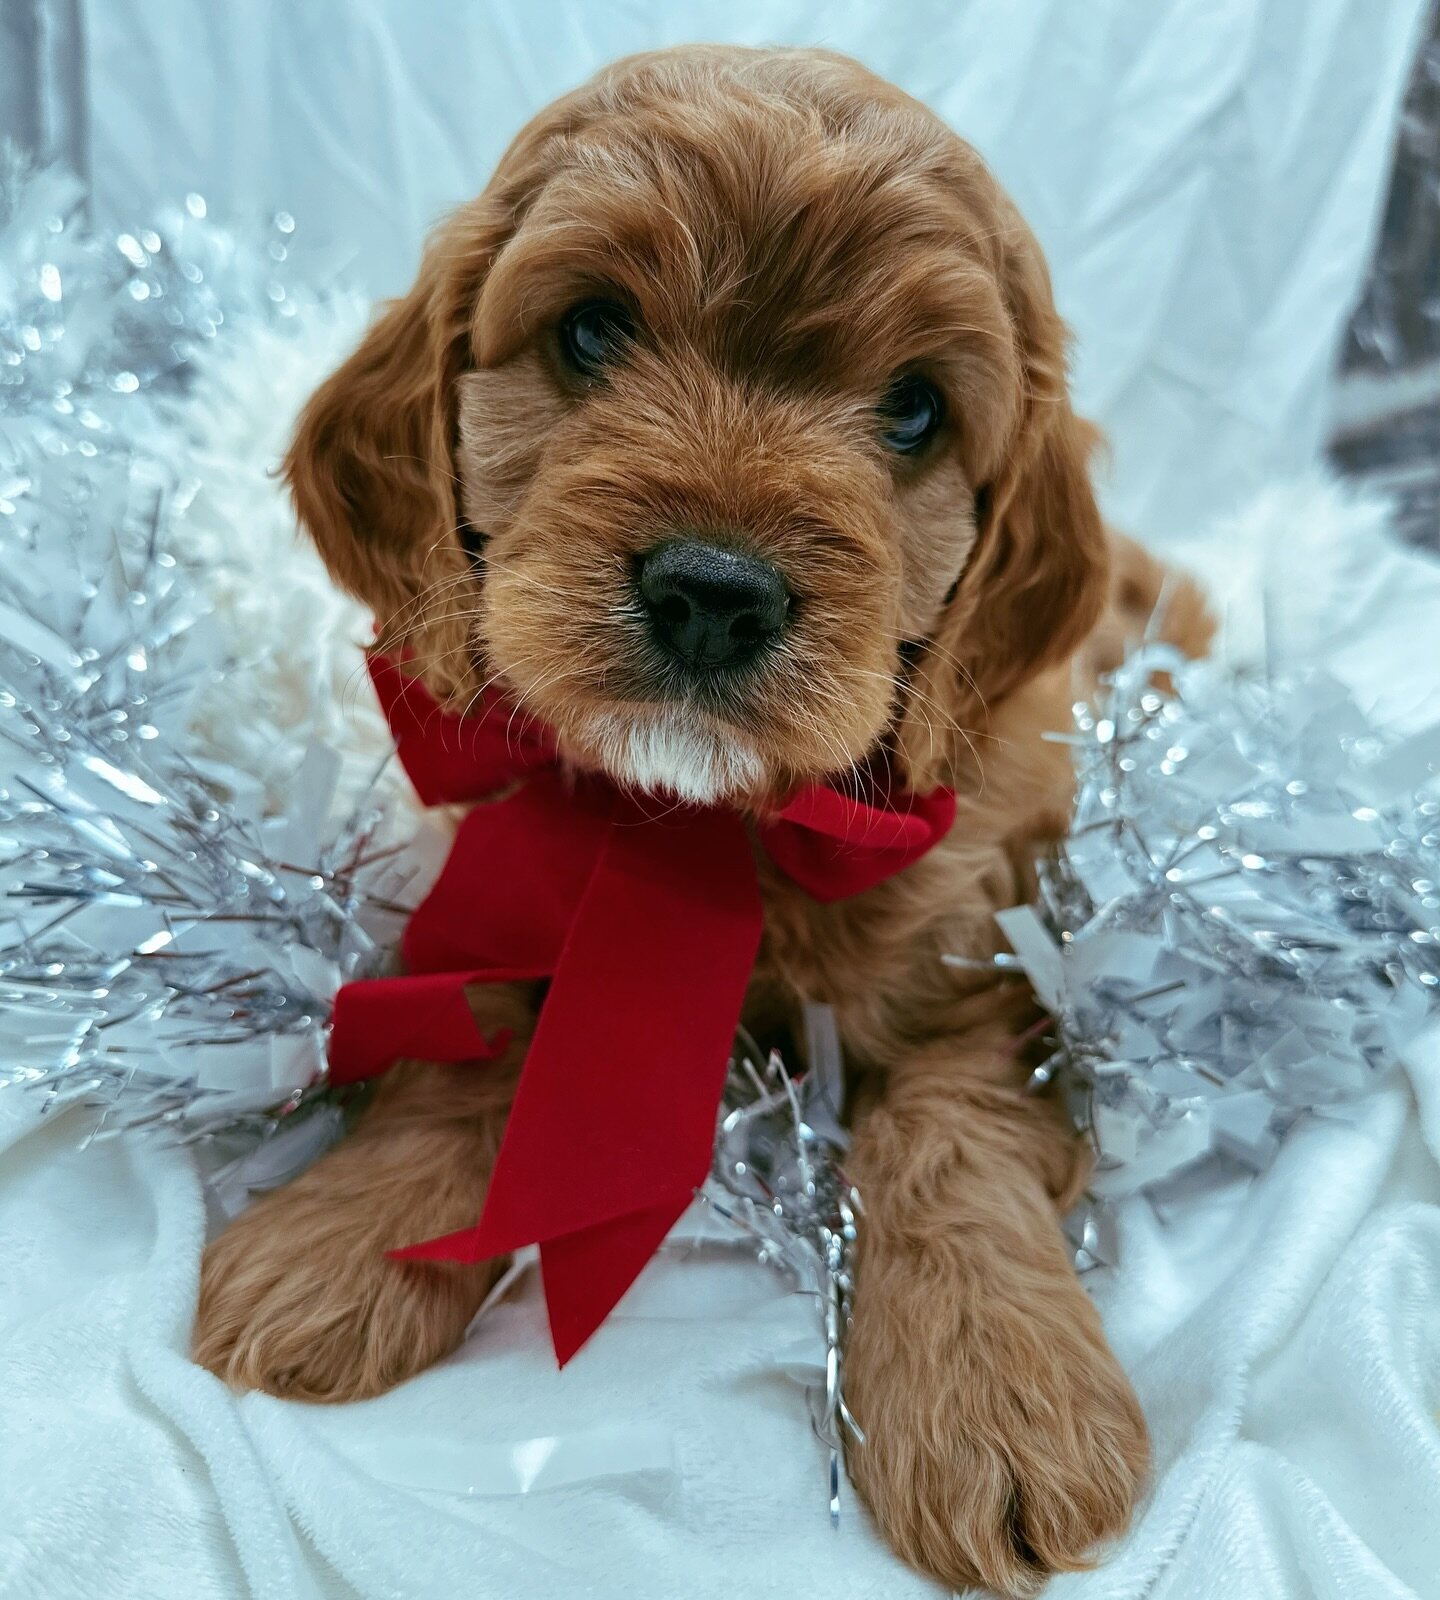 Merry Christmas from our family to yours 🐶&hearts;️🌟 #rosedaledoodles #christmas #puppy #puppies #puppylove #cavapoo #cavapoopuppy #cavapoogram #cavapoolovers #dog #dogs #doglover #dogsofinstagram #doglovers #christmas #christmaspuppy